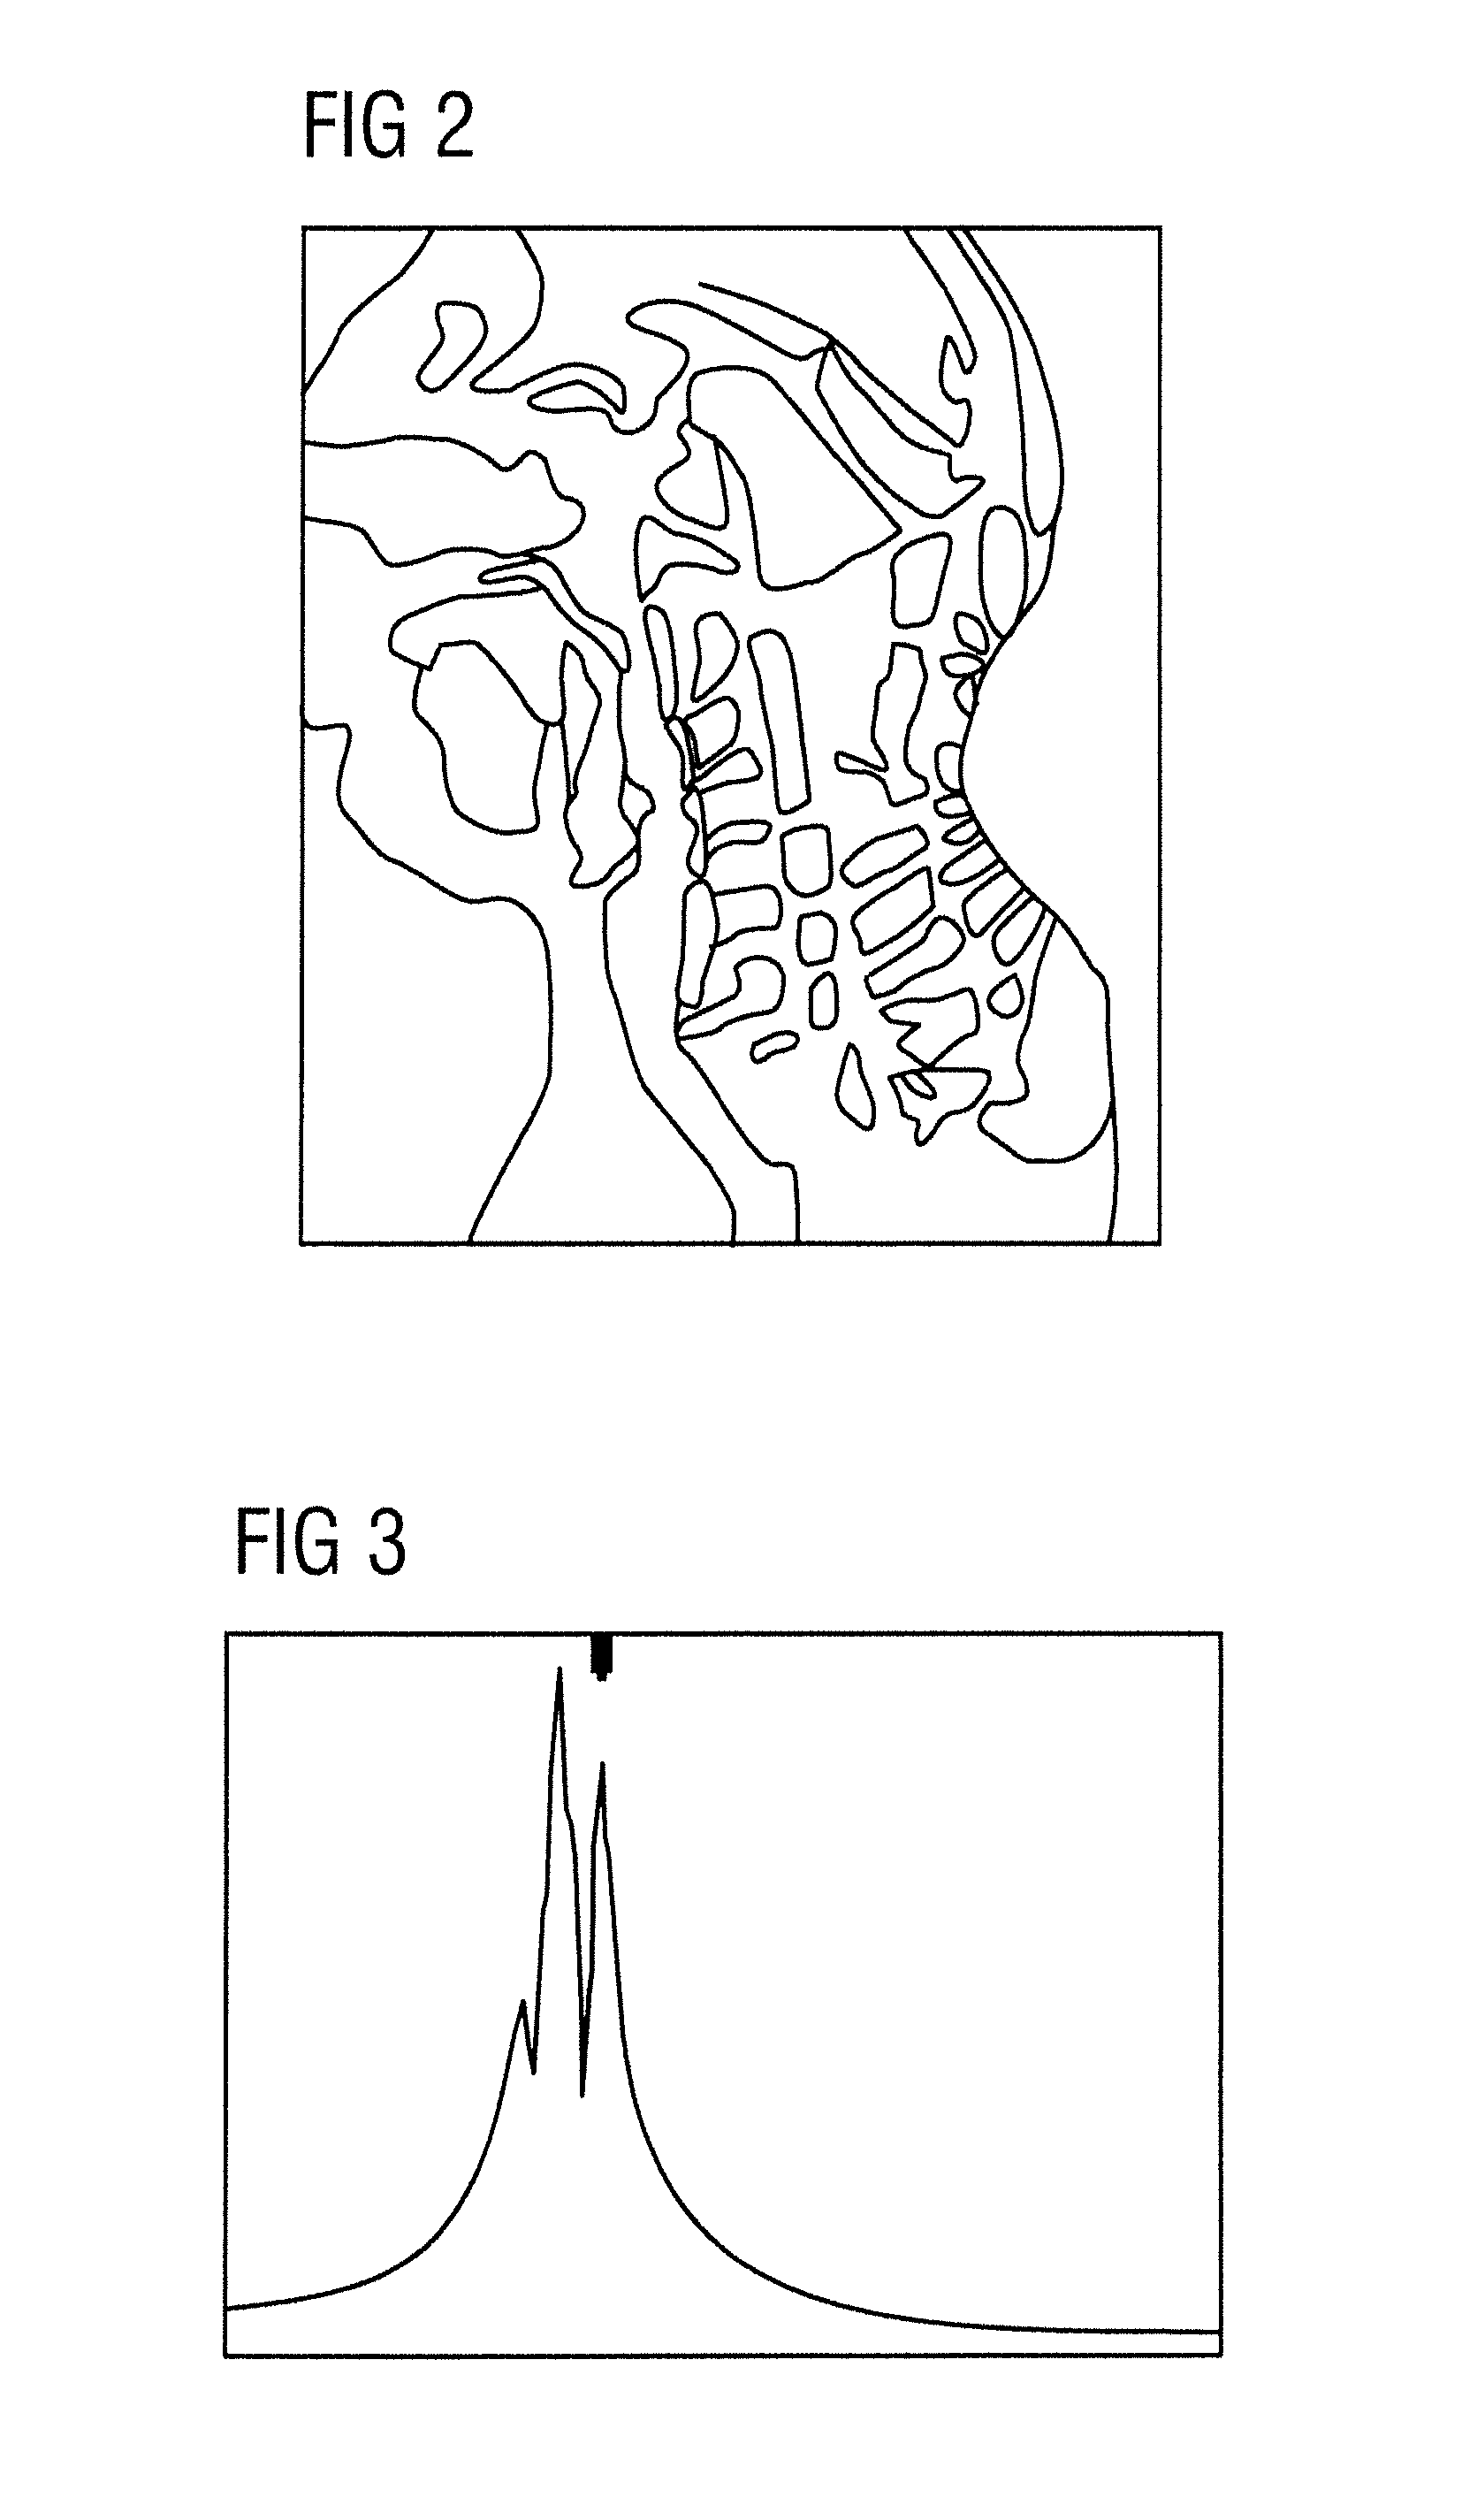 Method for imaging in magnetic resonance tomography with spectral fat saturation or spectral water excitation